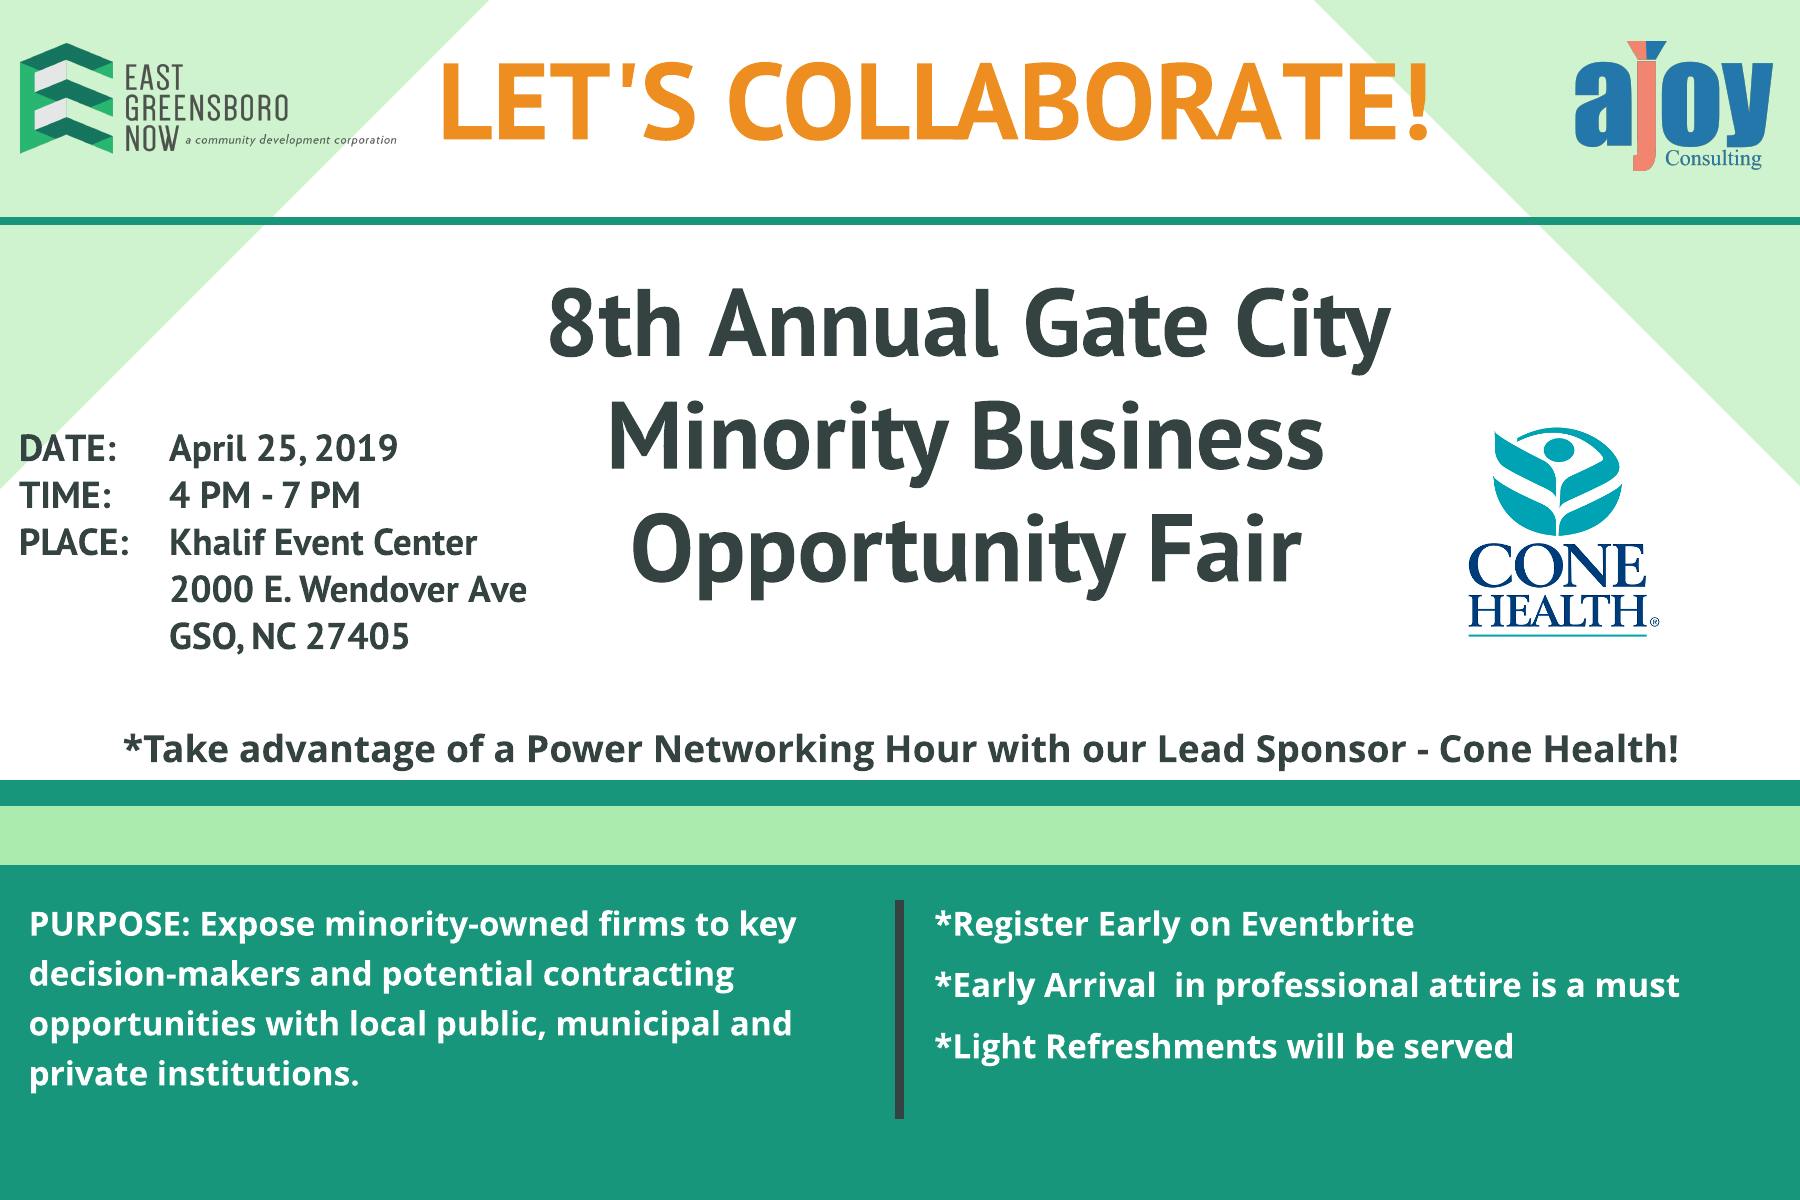 8th Annual Gate City Minority Business Opportunity Fair